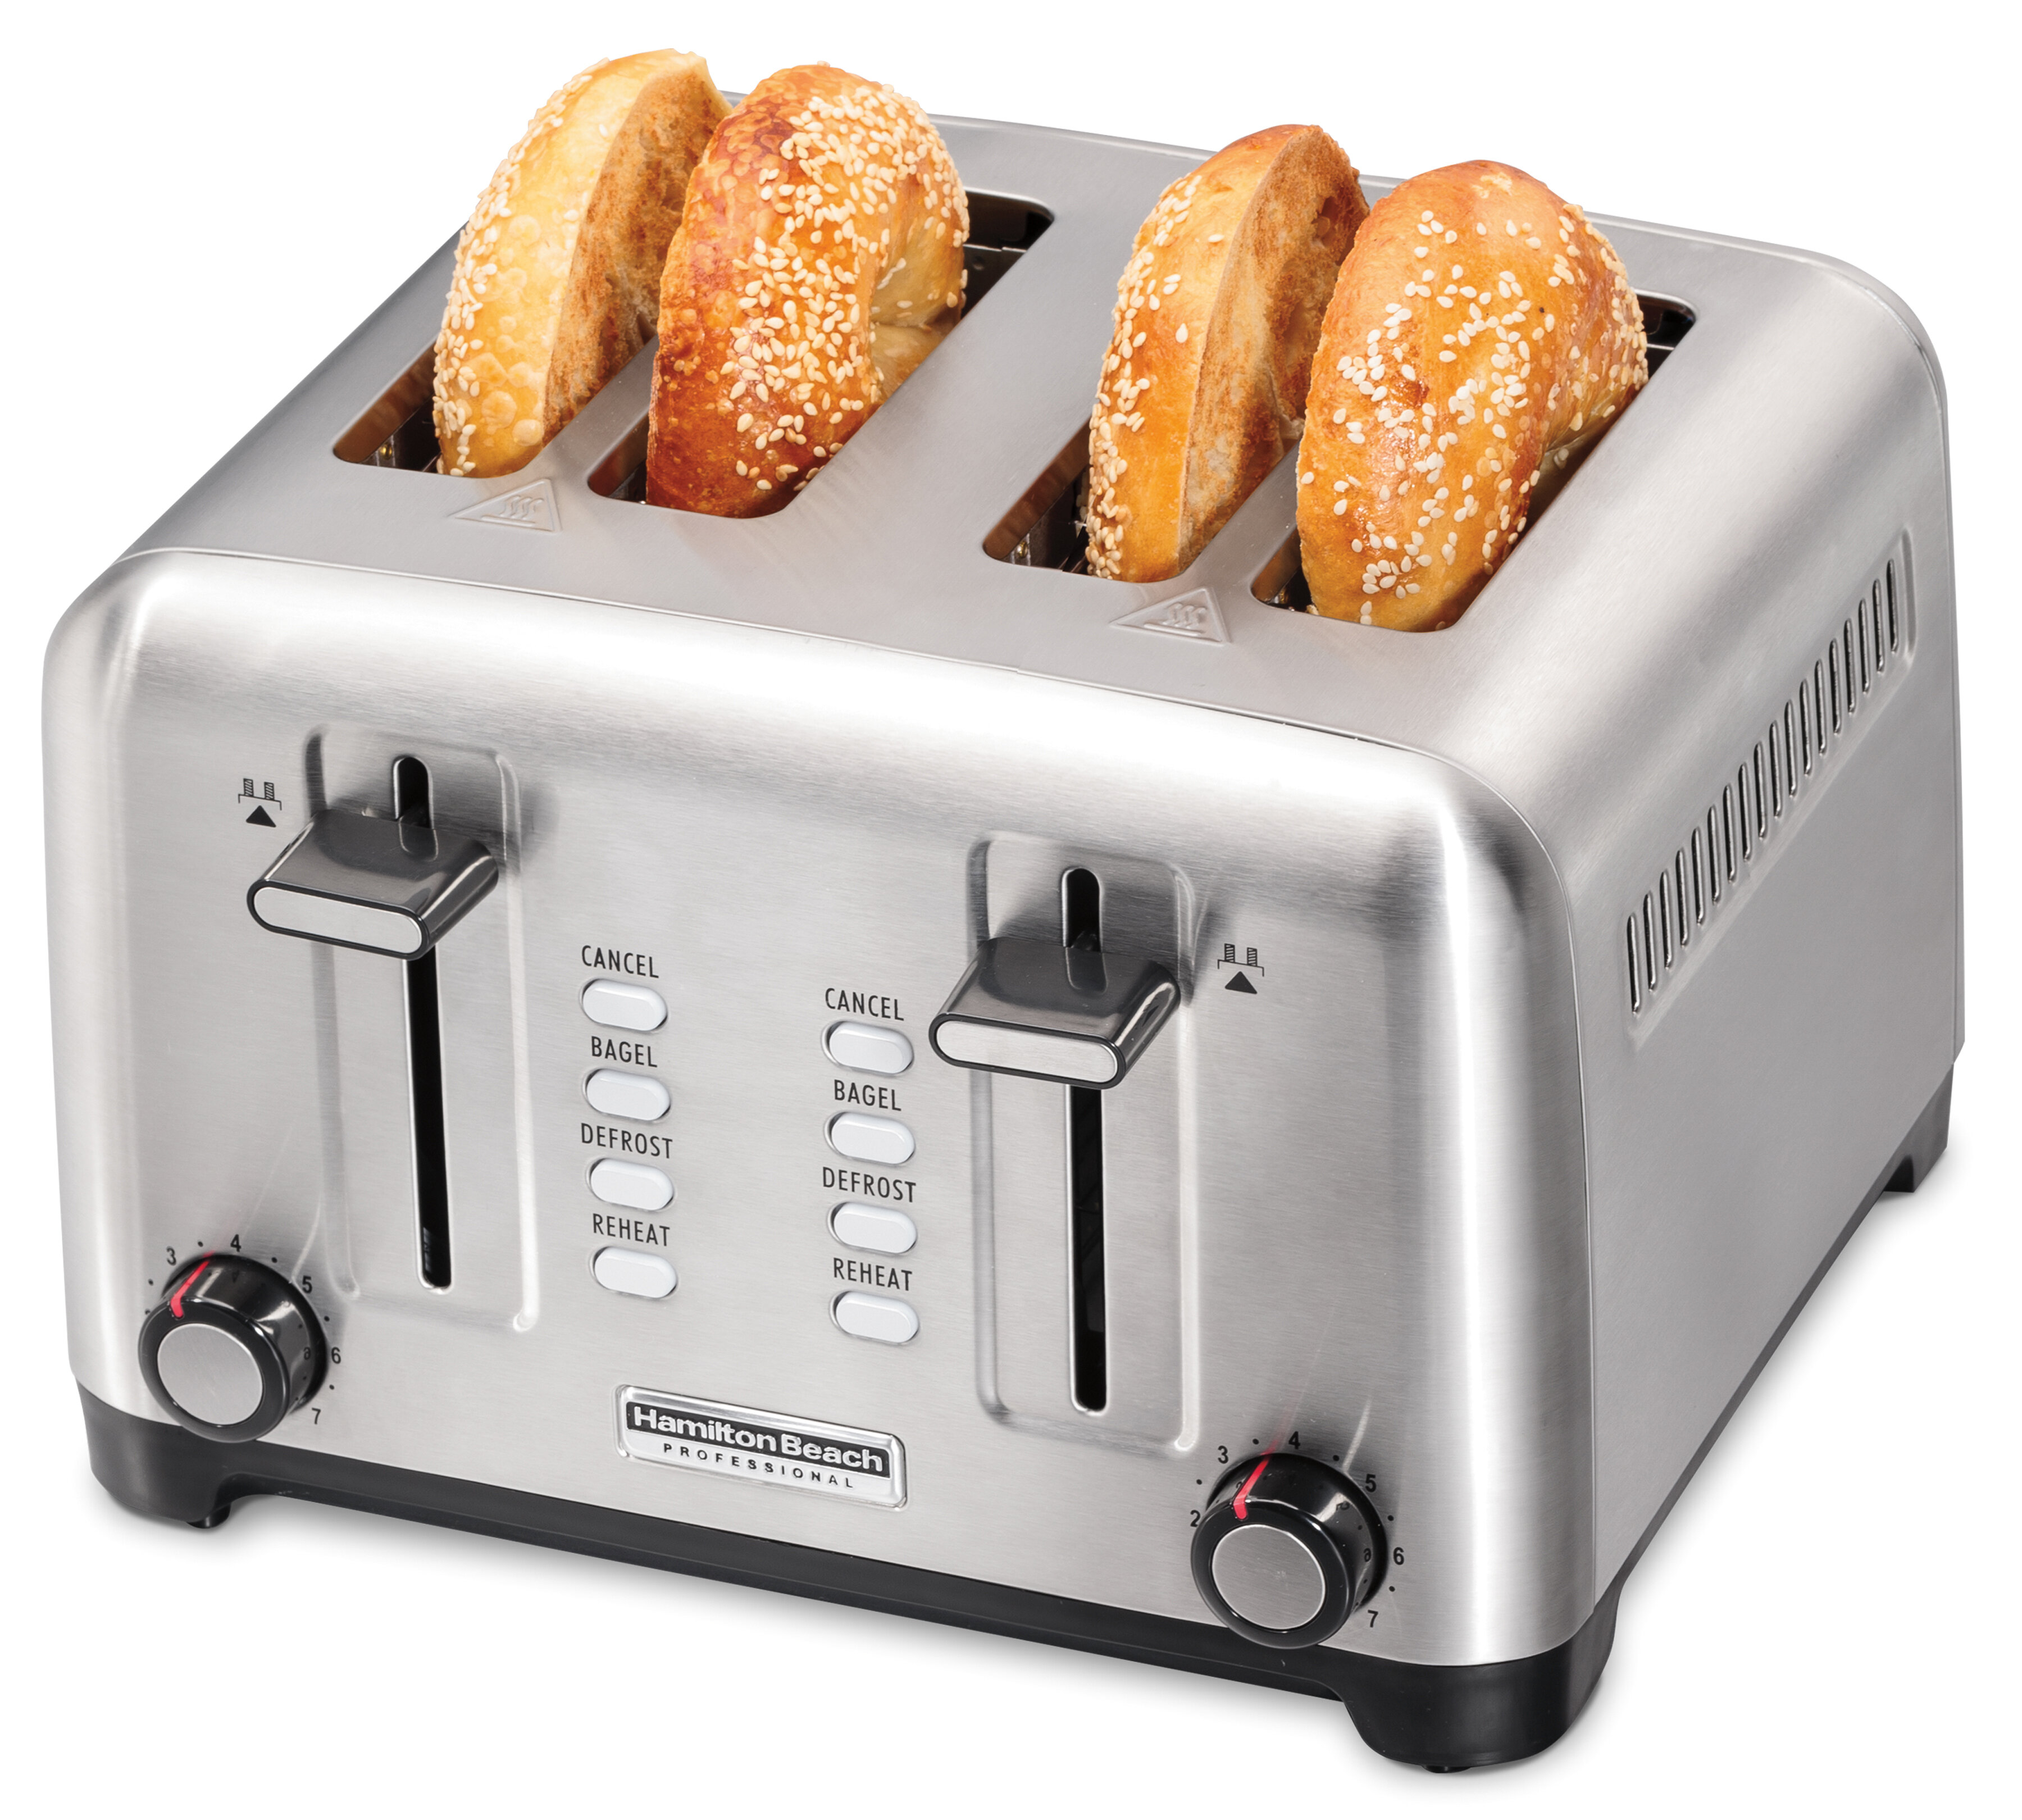 Removable Slide On Crumb Tray 1750w 6 Browning Bread Toast Settings Grey High Lift LIVIVO Taurus 4 Slice Toaster Glossy Finish with Extra Wide Slots Reheat Defrost & Cancel Functions 